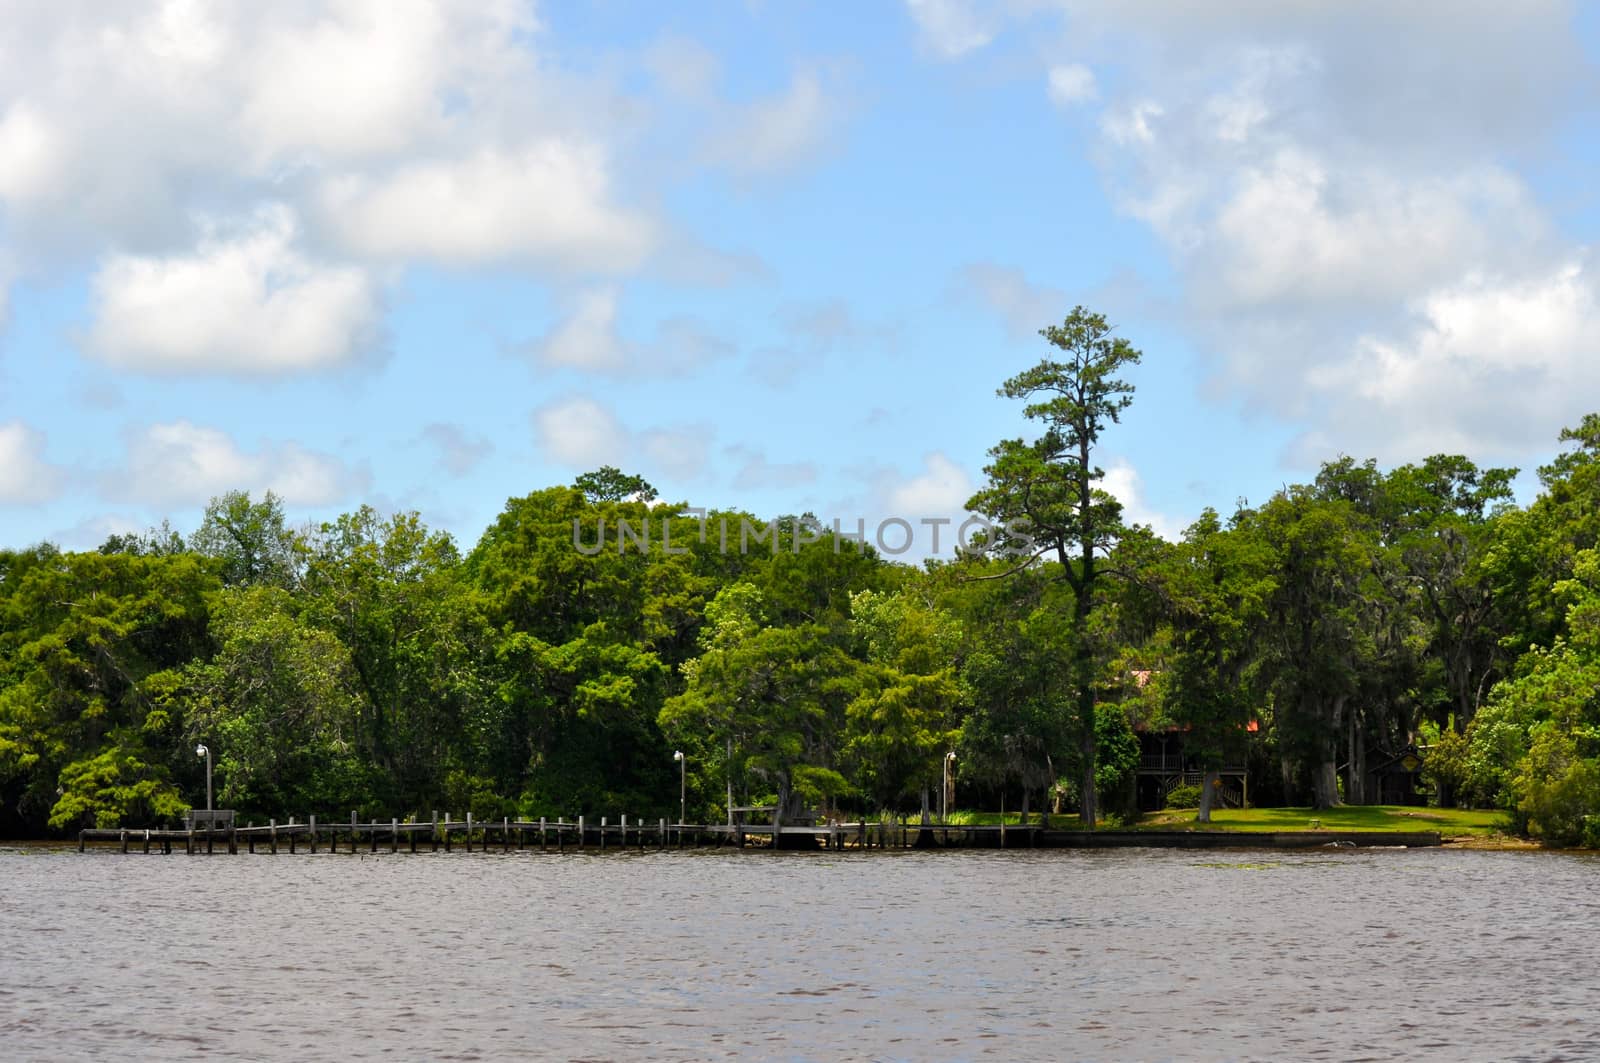 Waccamaw River by RefocusPhoto